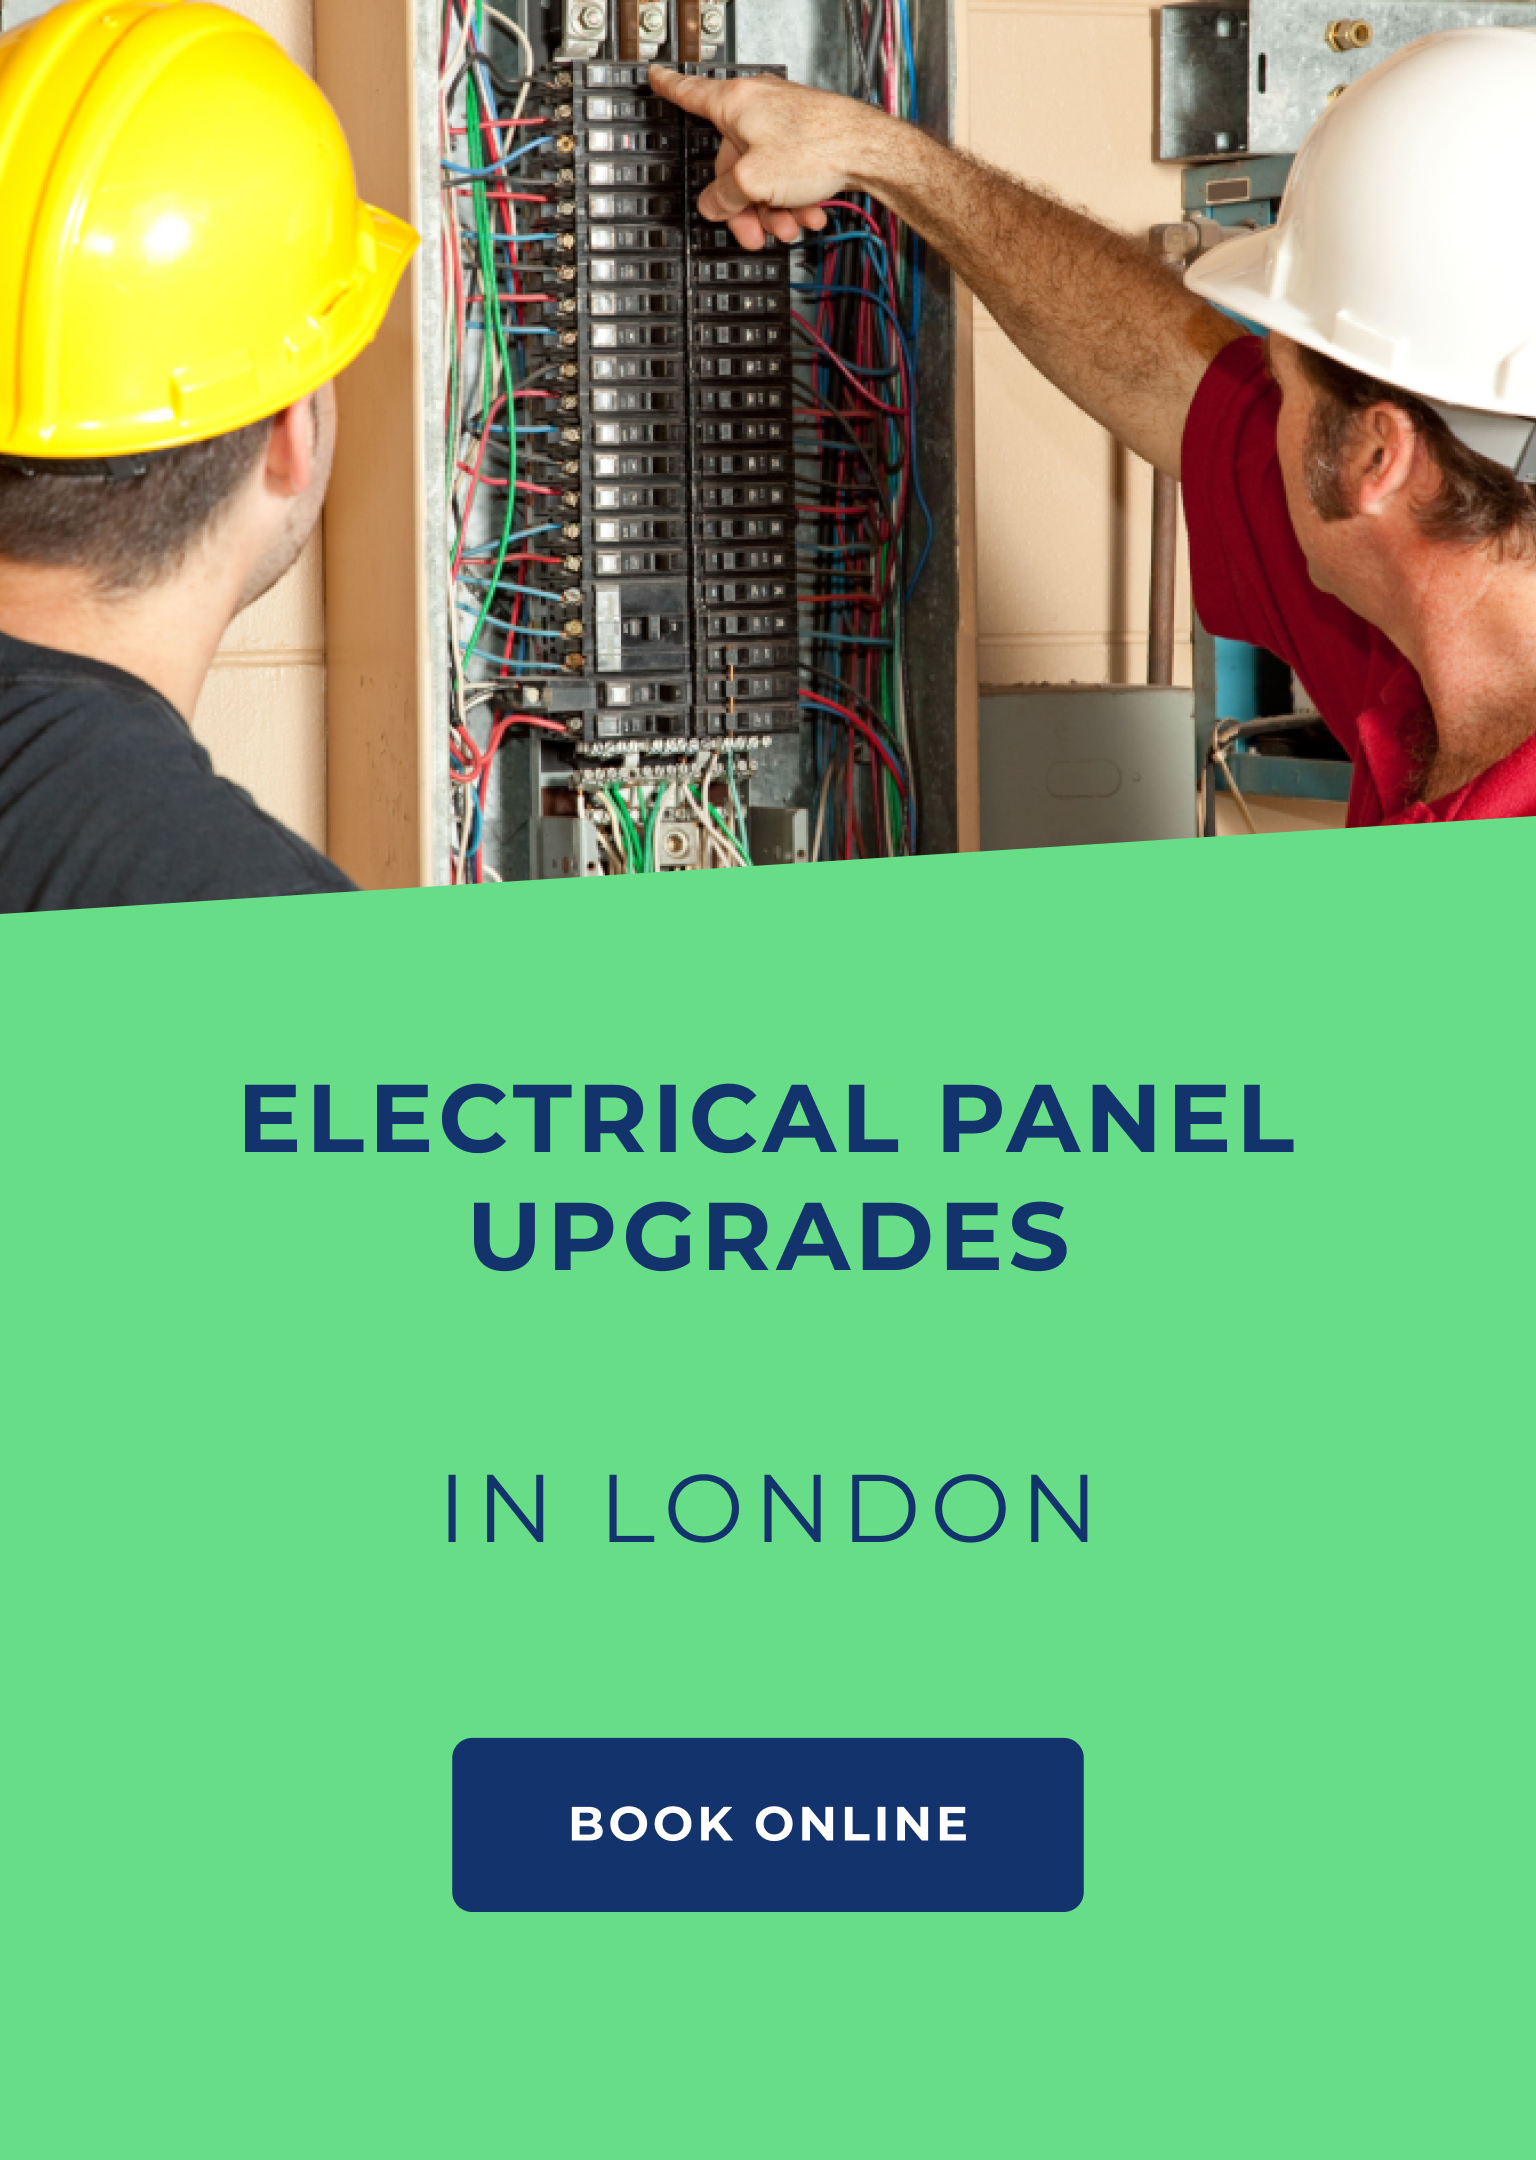 Electrical panel upgrades in London